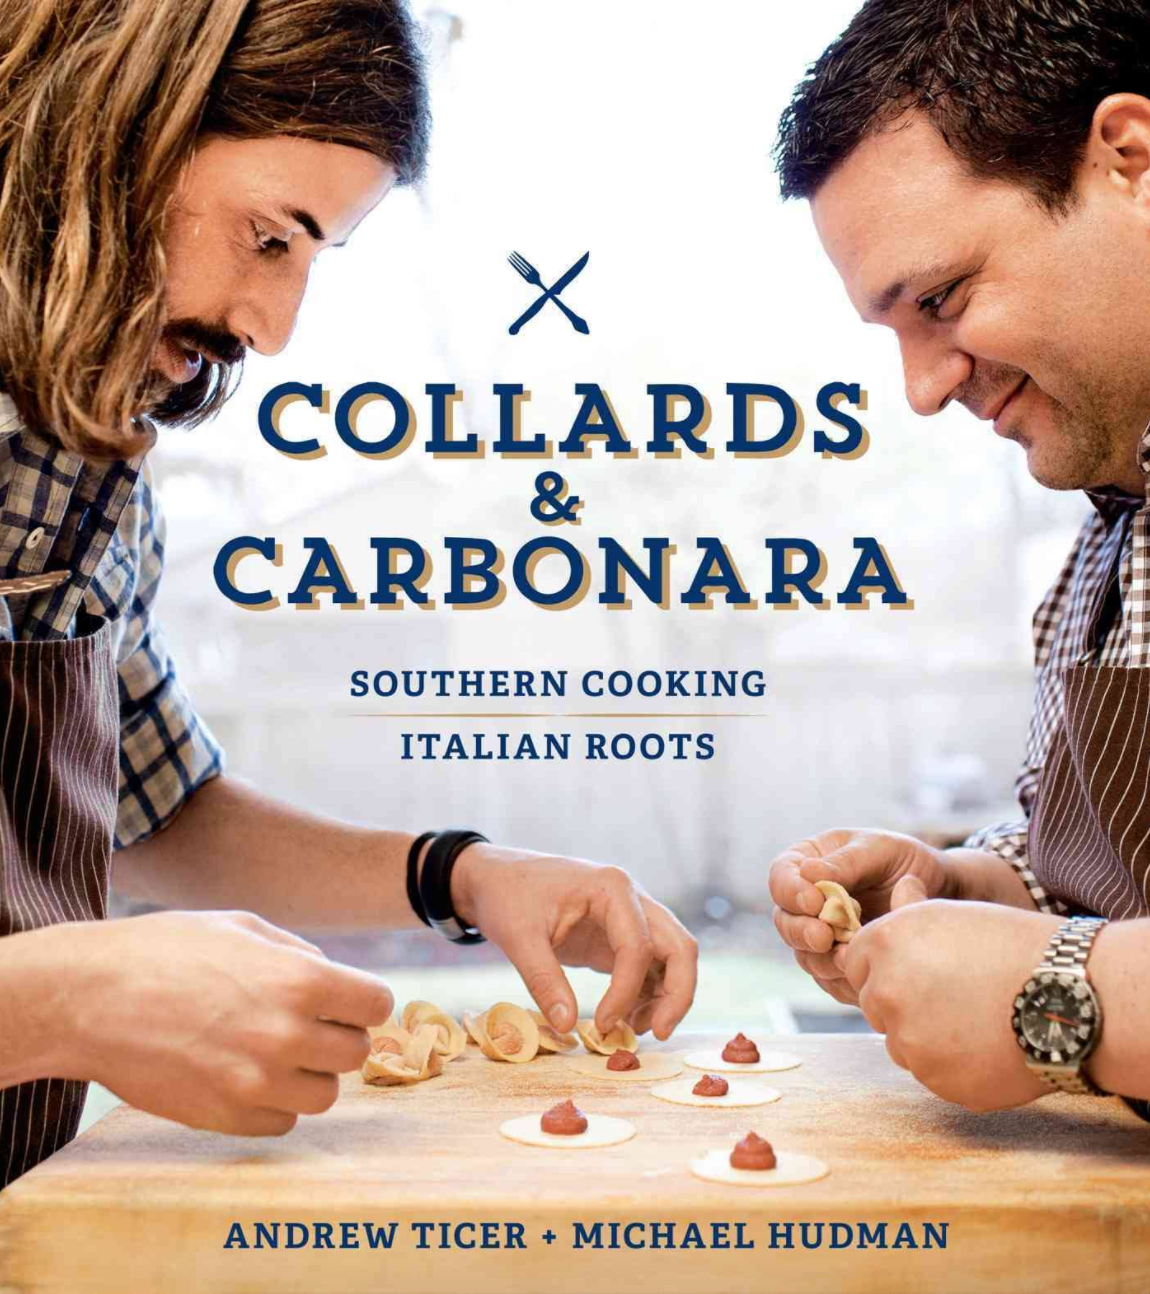 Collards and Carbonara - Southern Cooking, Italian Roots by Andrew Ticer and Michael Hudman